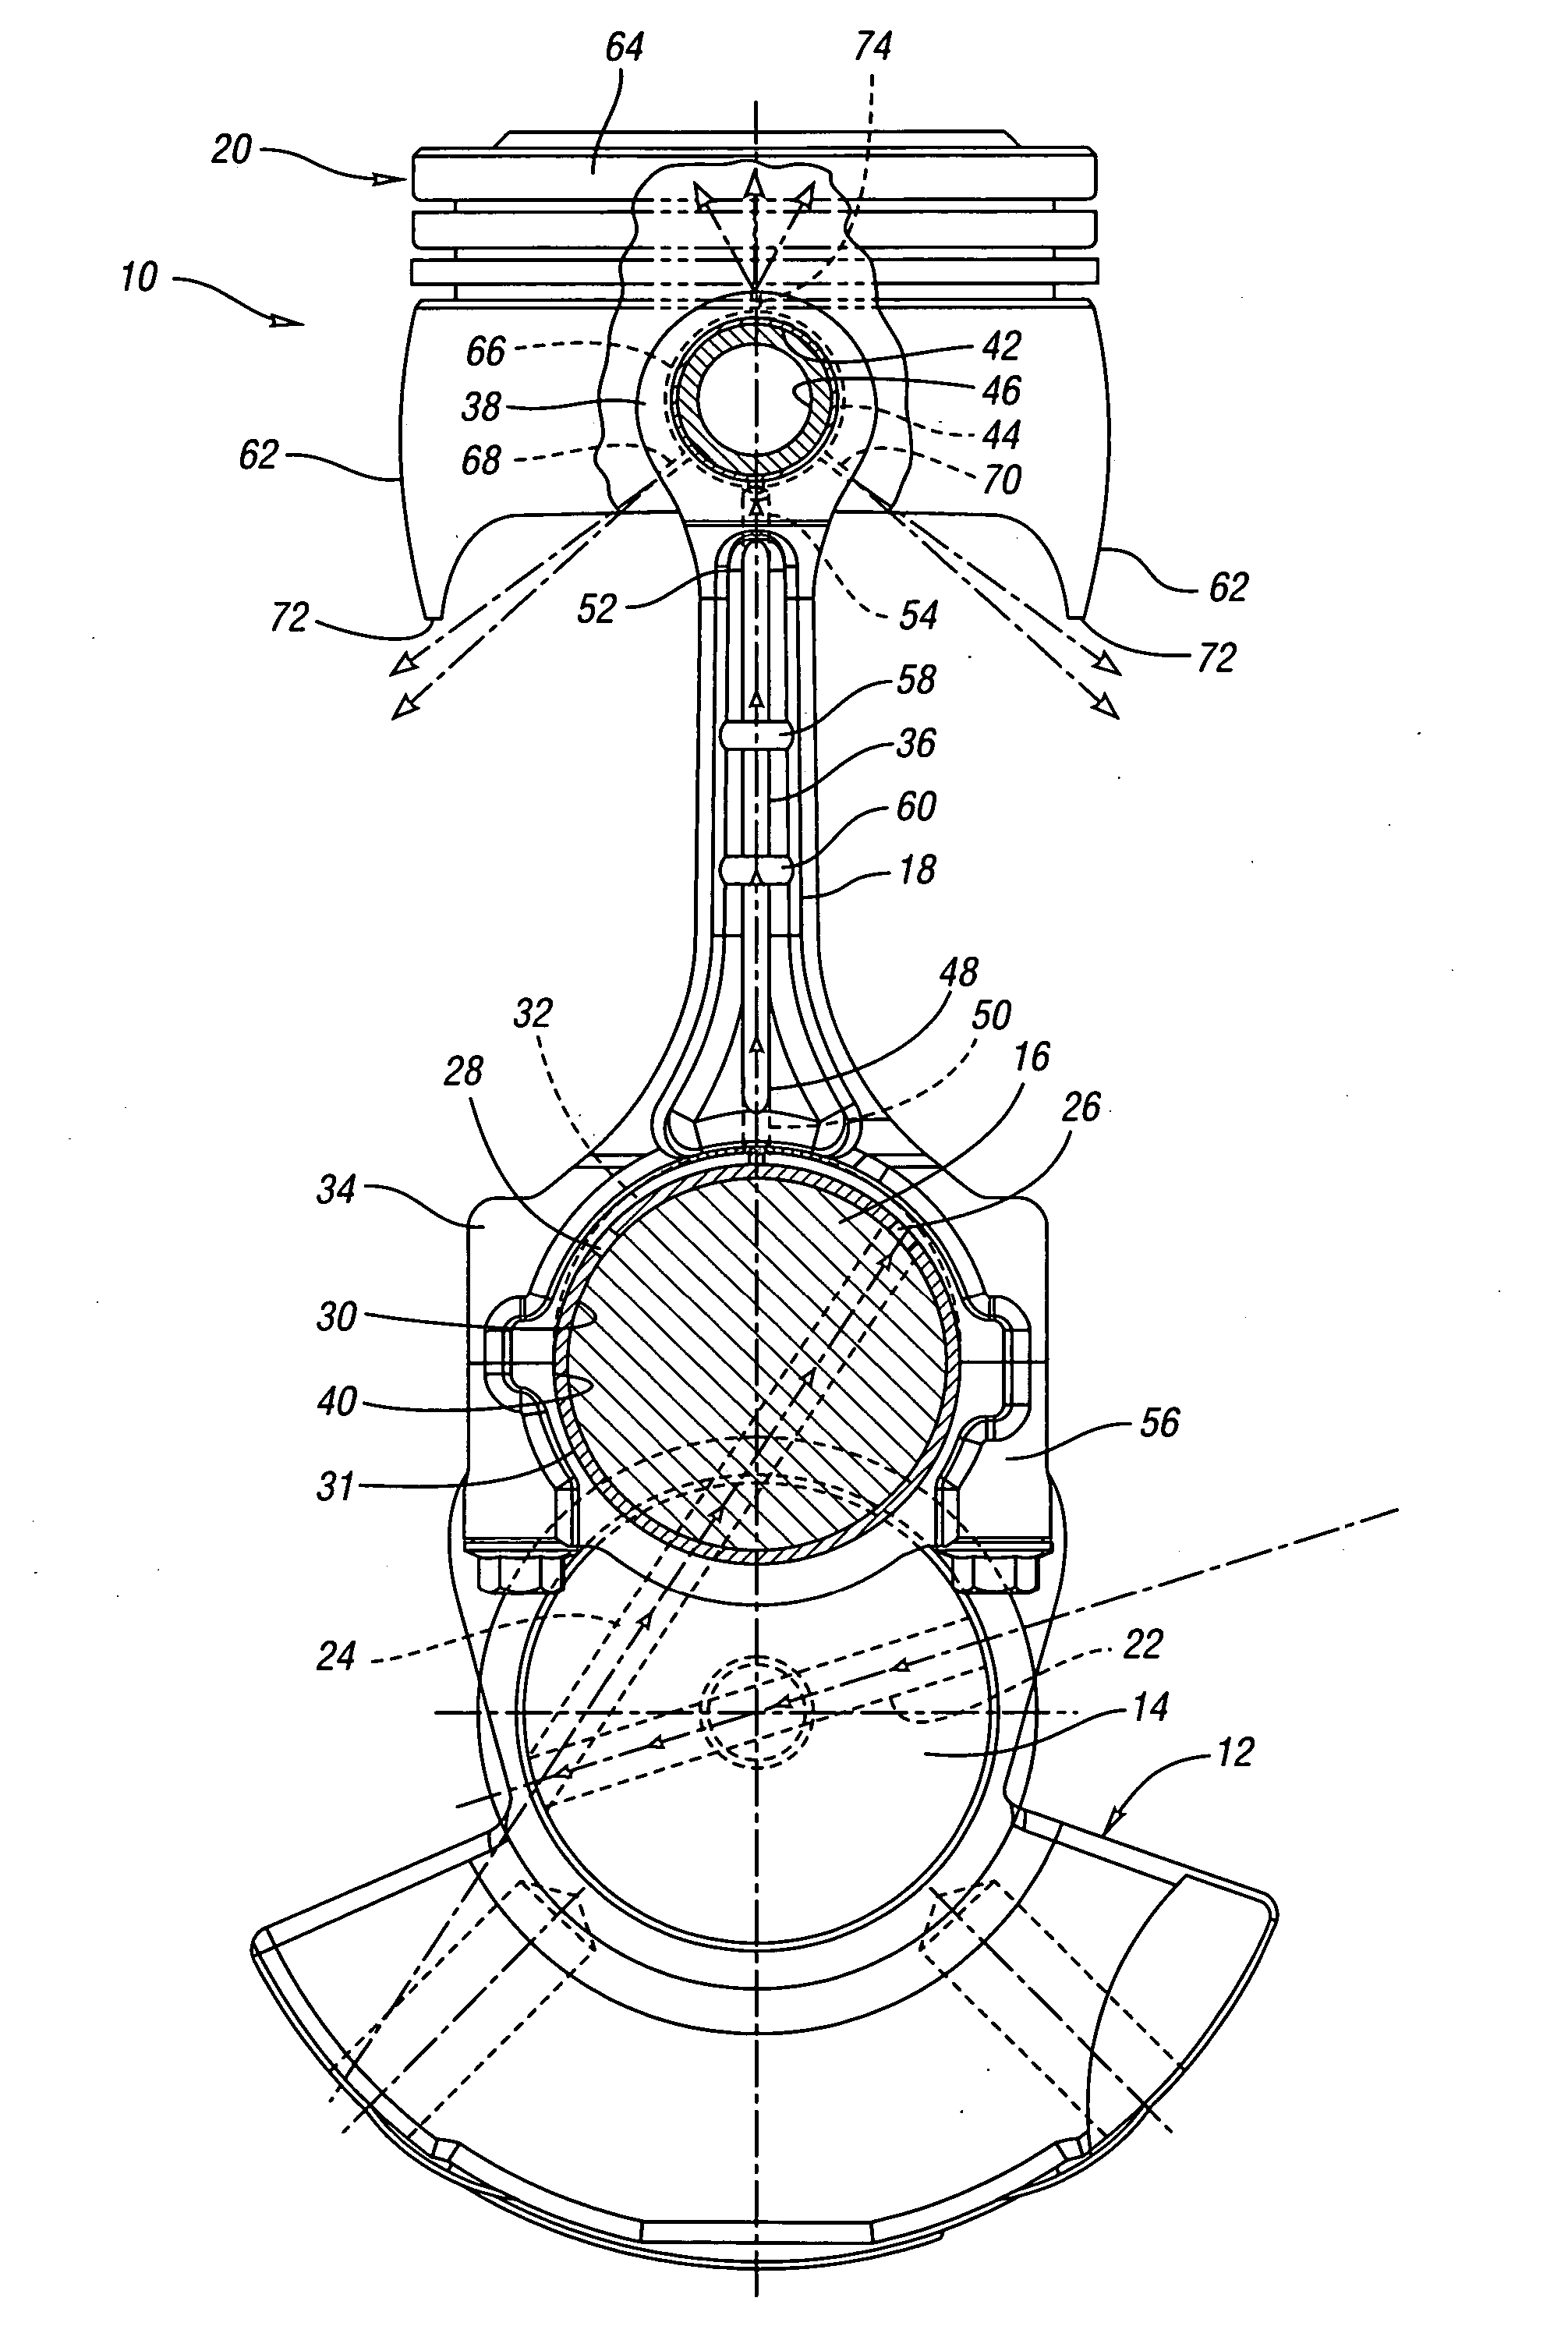 Connecting rod with lubricant tube